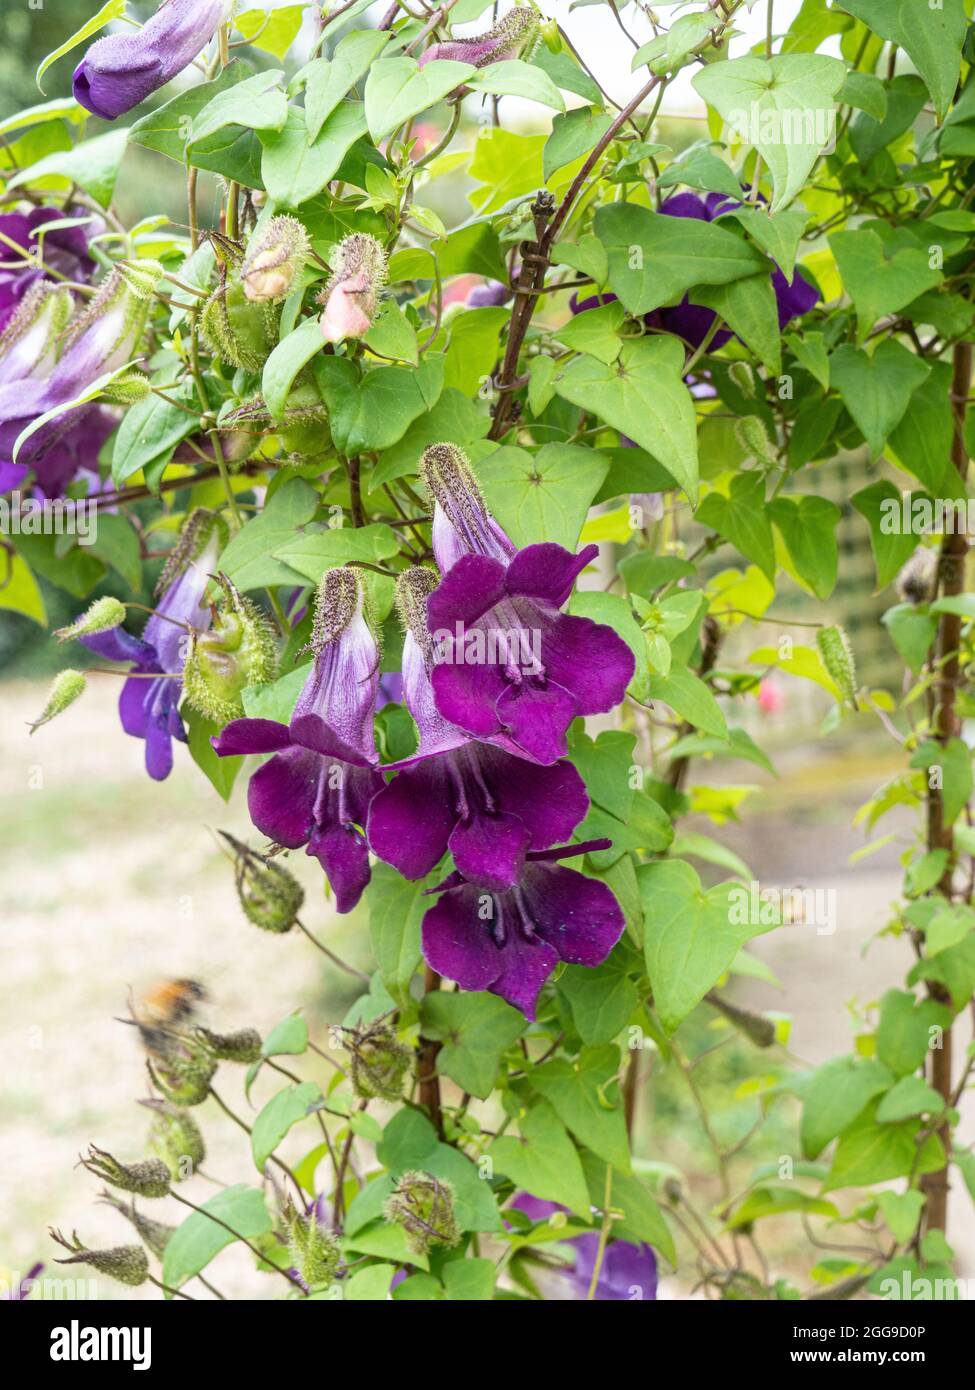 A group of the purple flowers of the climbing snapdragon Asarina scandens Stock Photo